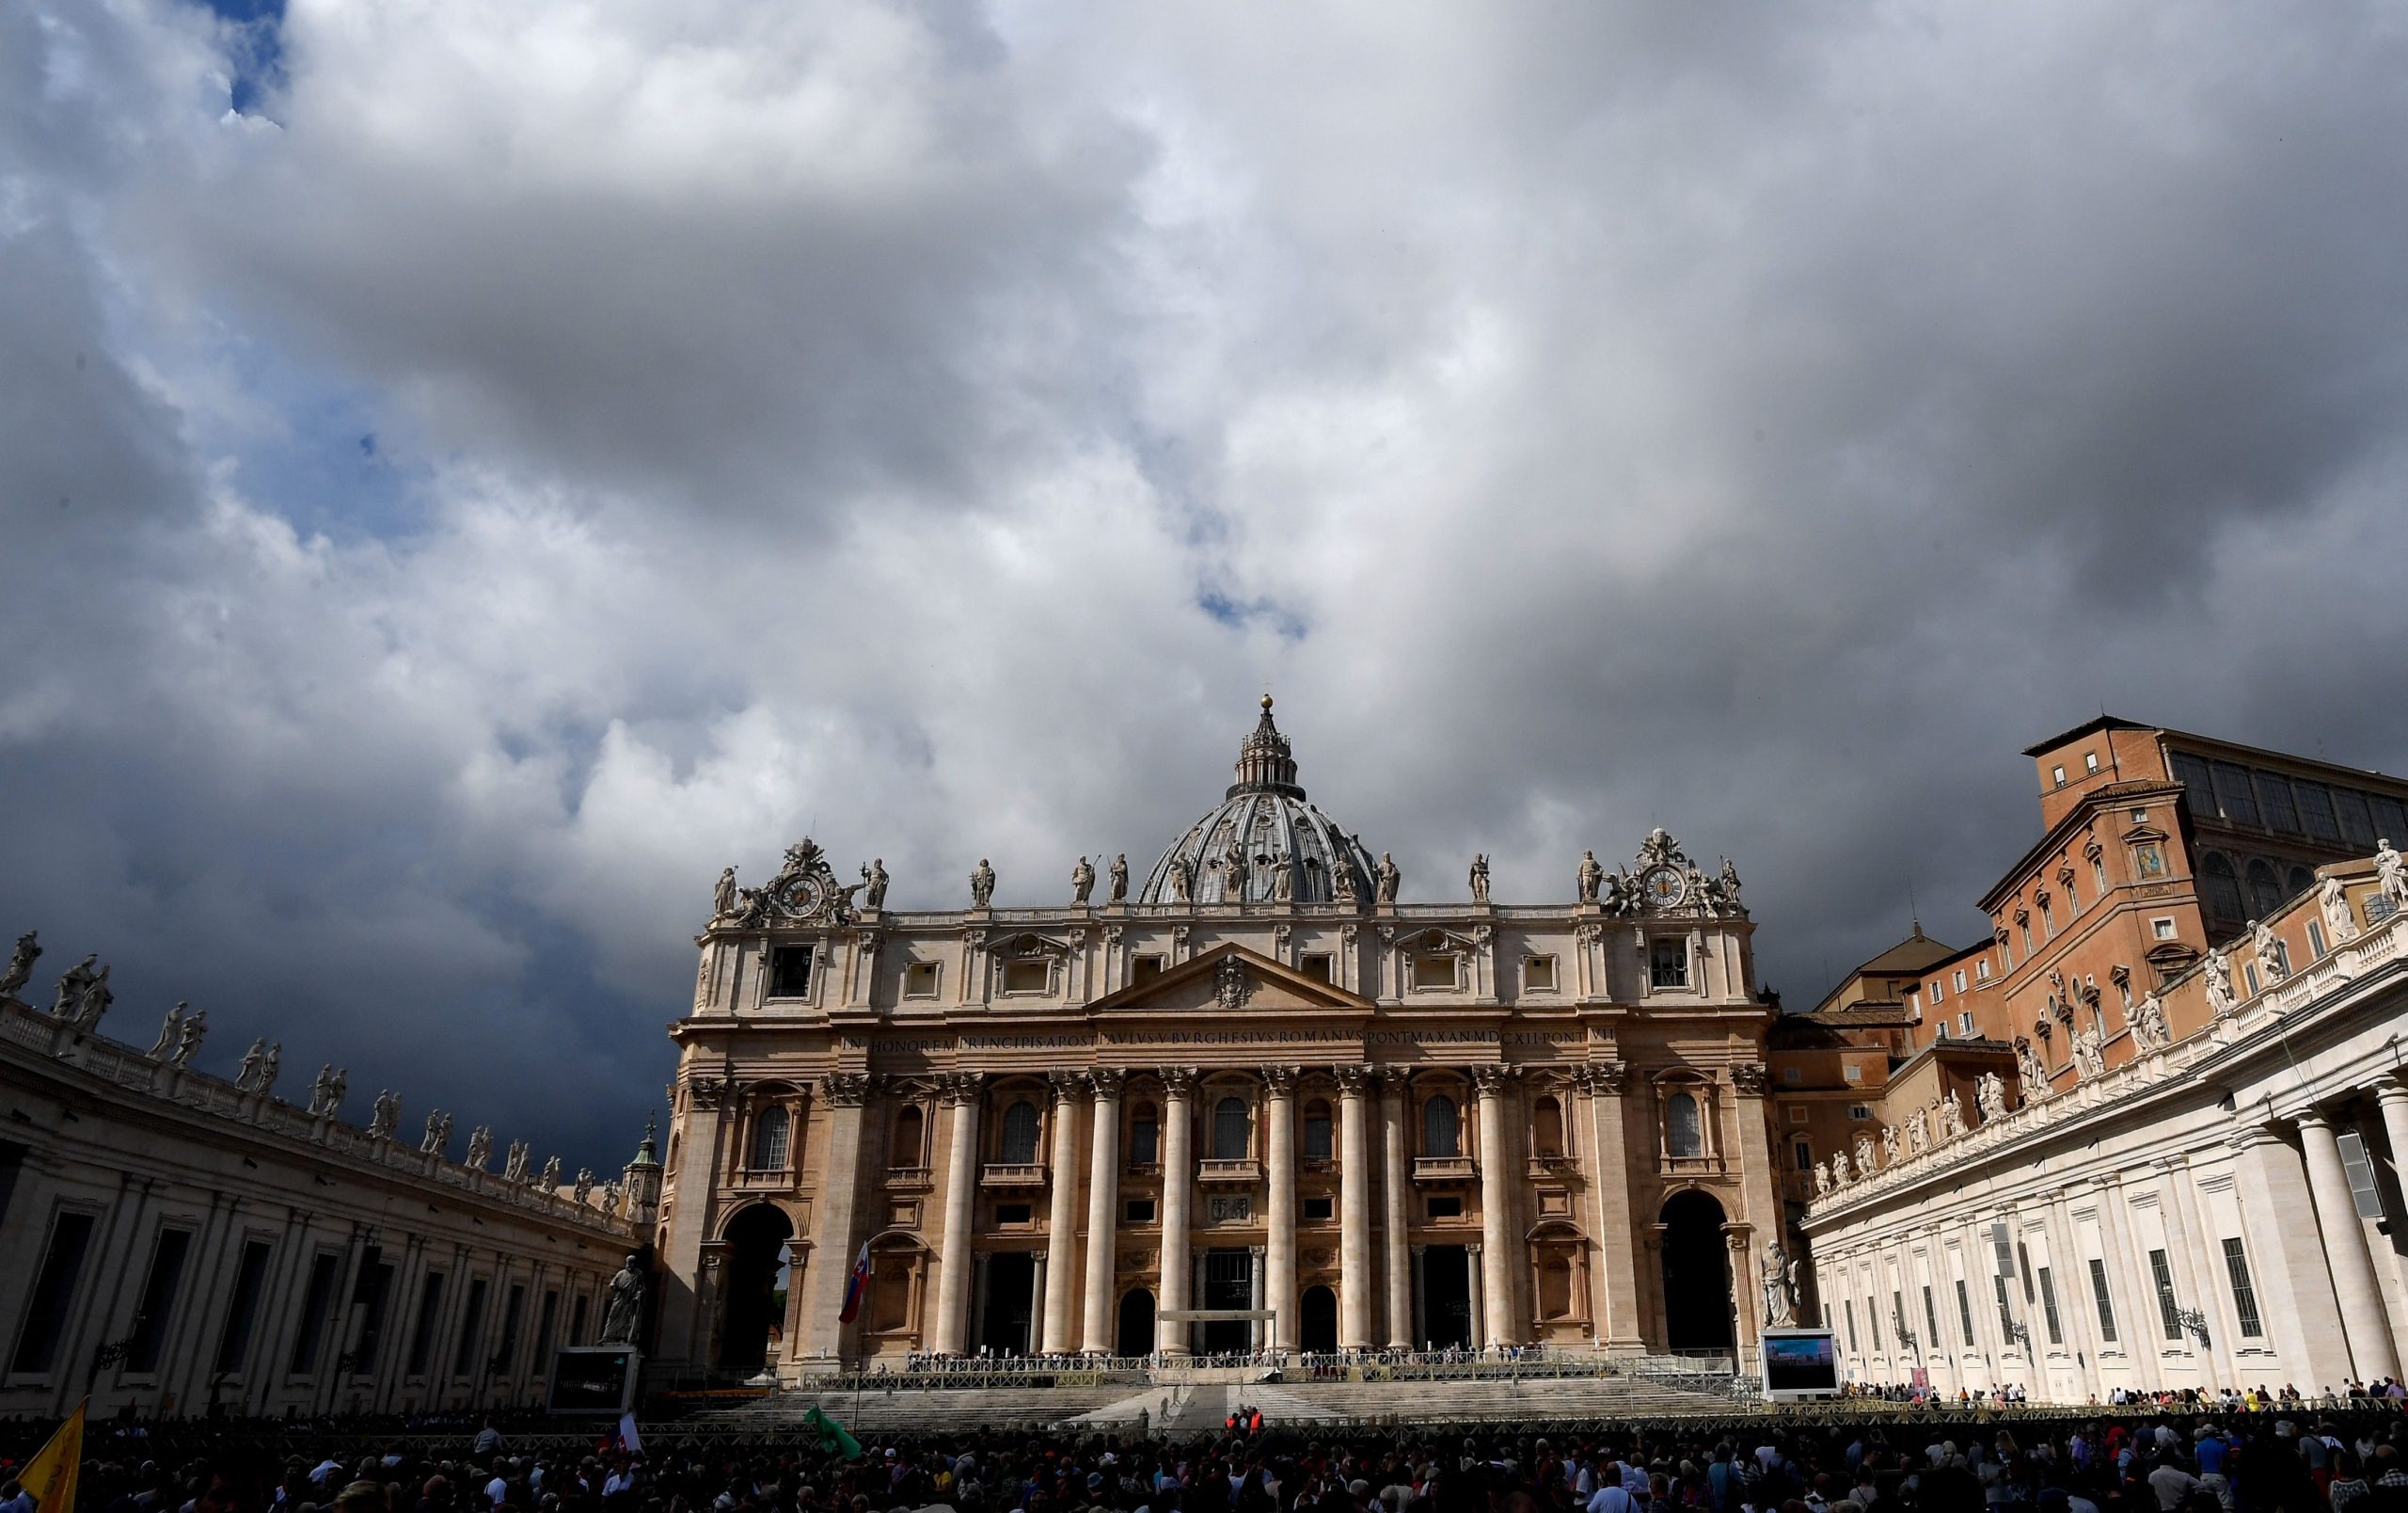 Vatican money for real estate investments: documents and PCs seized from Monsignor Perlasca